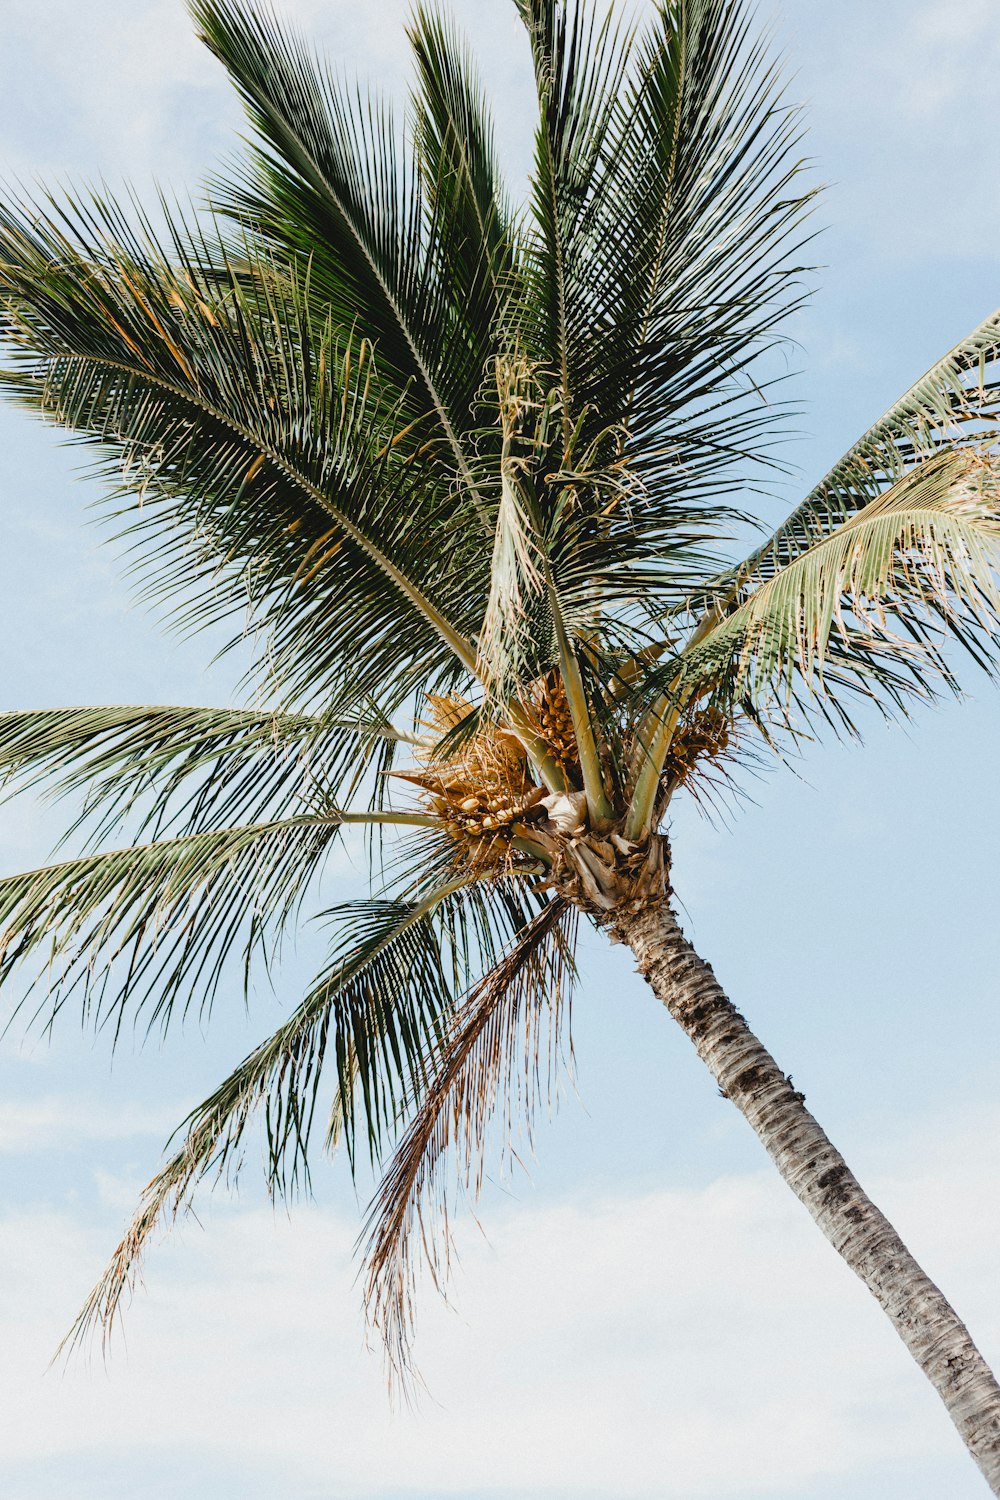 photo of coconut tree during daytime